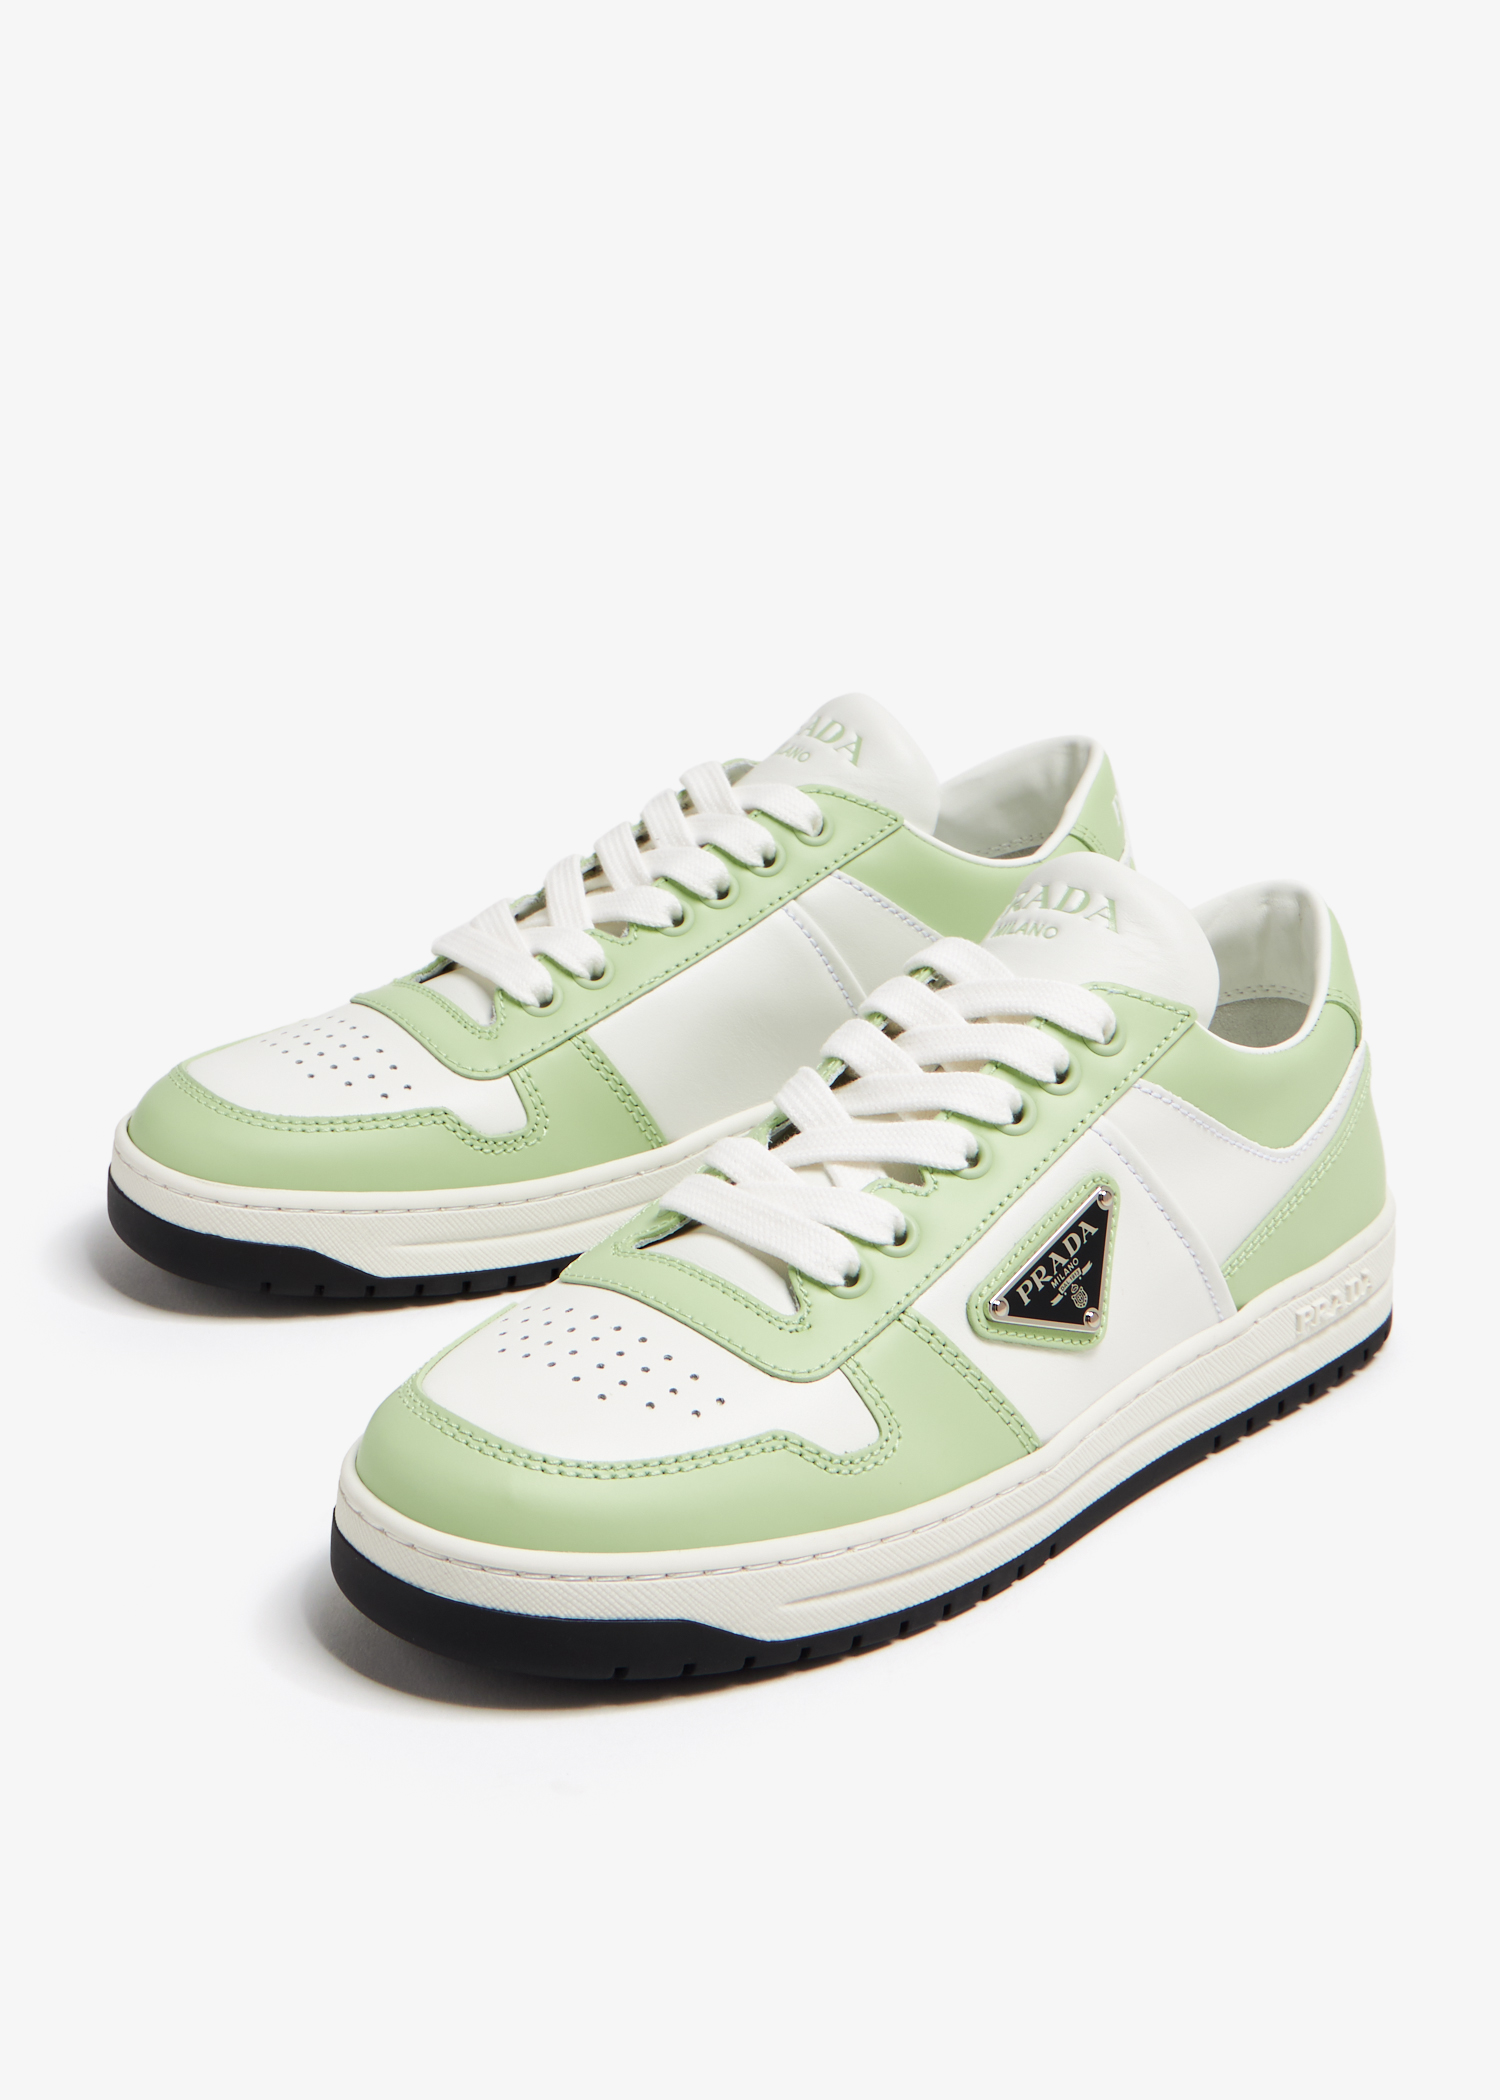 Prada Downtown Sneakers US10.5 UK9.5 White Green Teal Leather